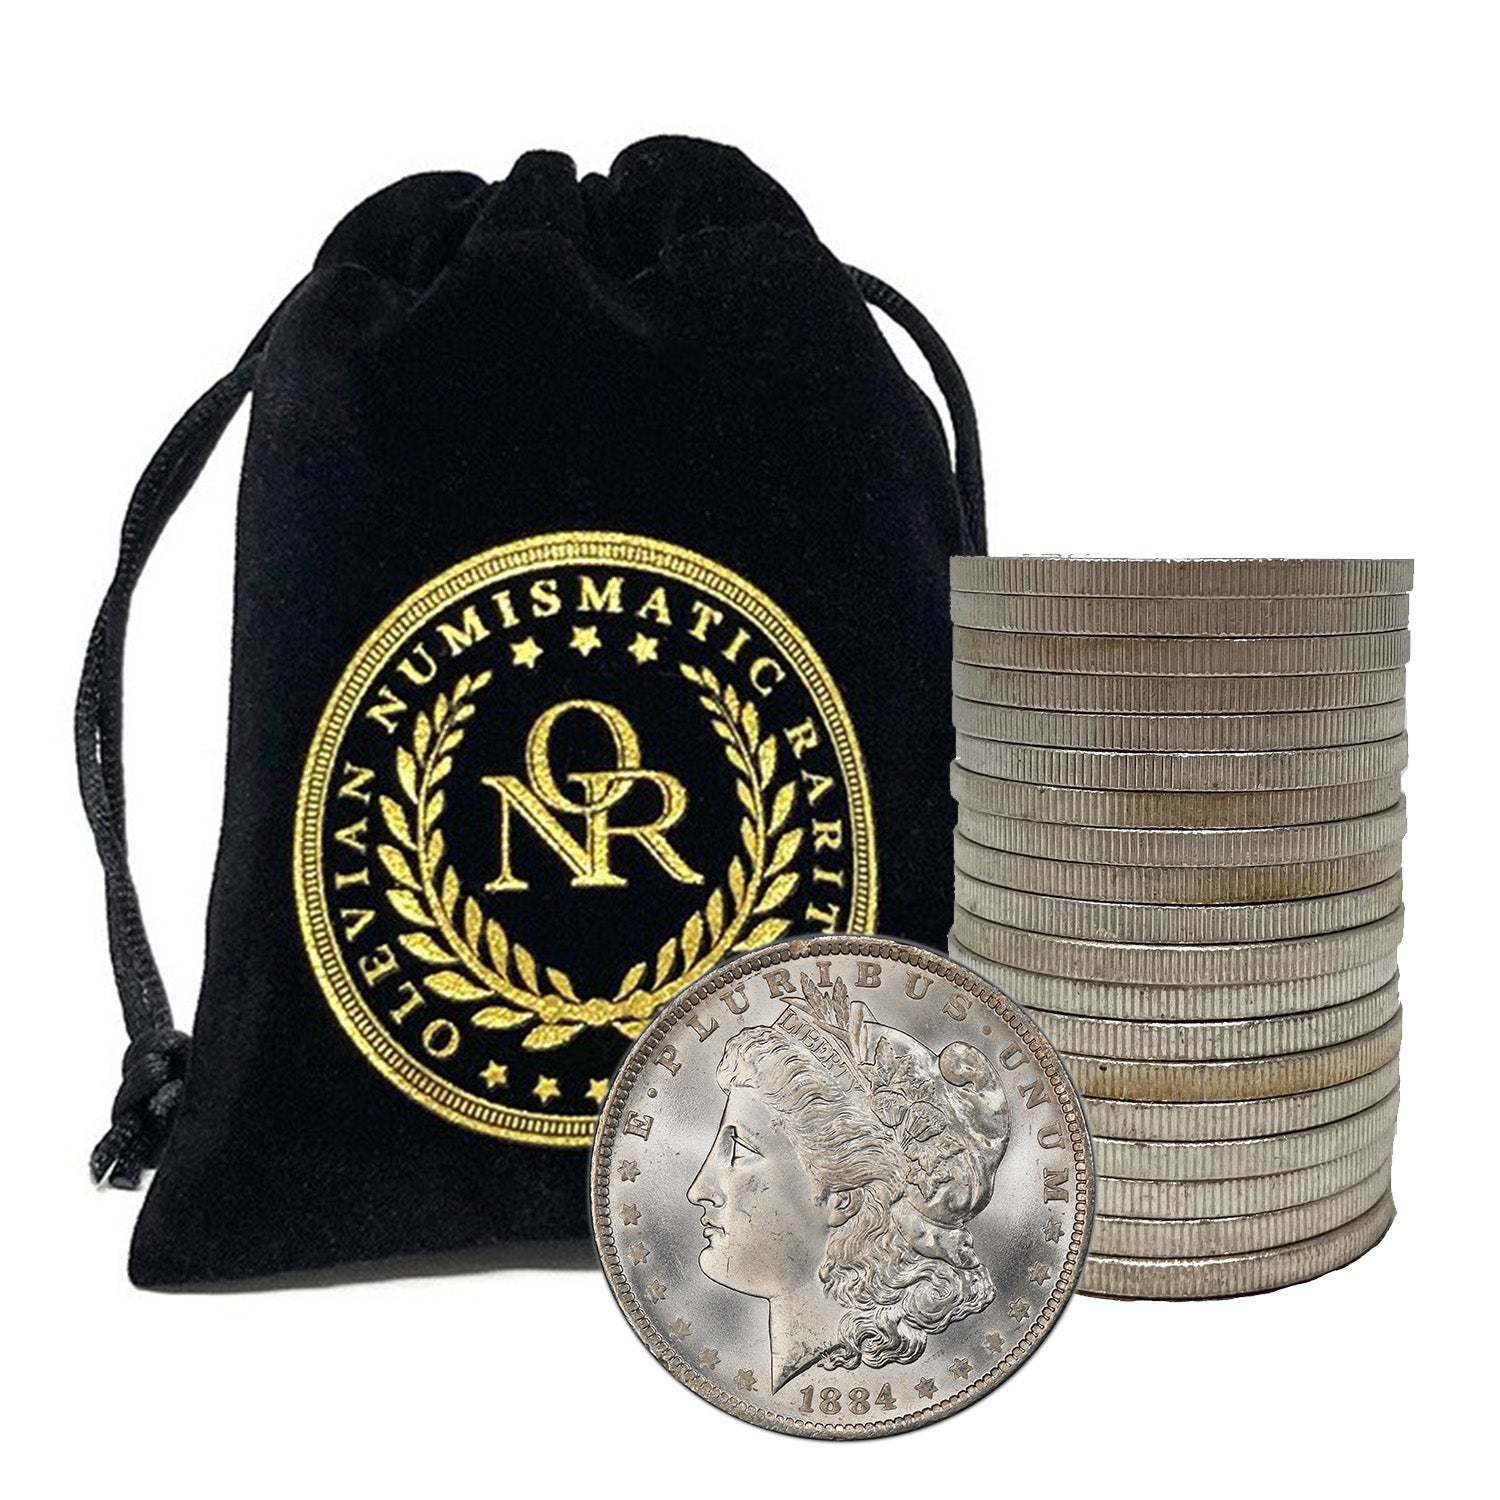 Roll of 20 Morgan Silver Dollars, 5+ Different Dates from 1878 to 1904 in Brilliant Uncirculated Condition